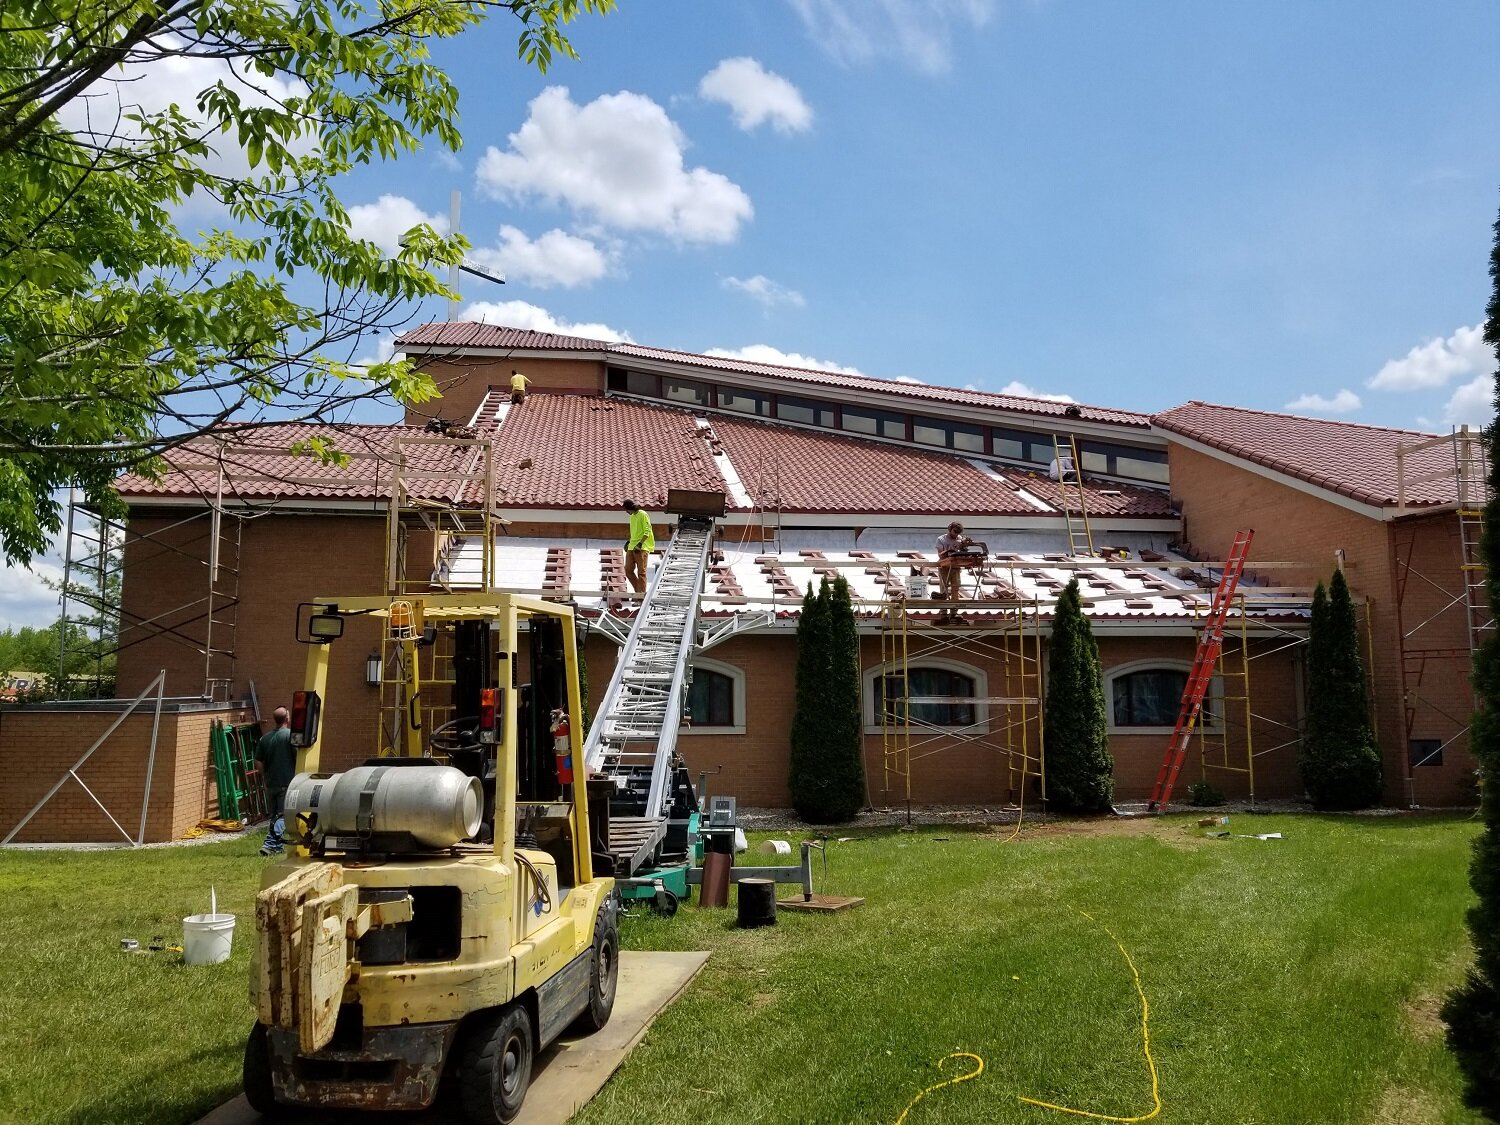  May 6 - working on chapel roof section #6 